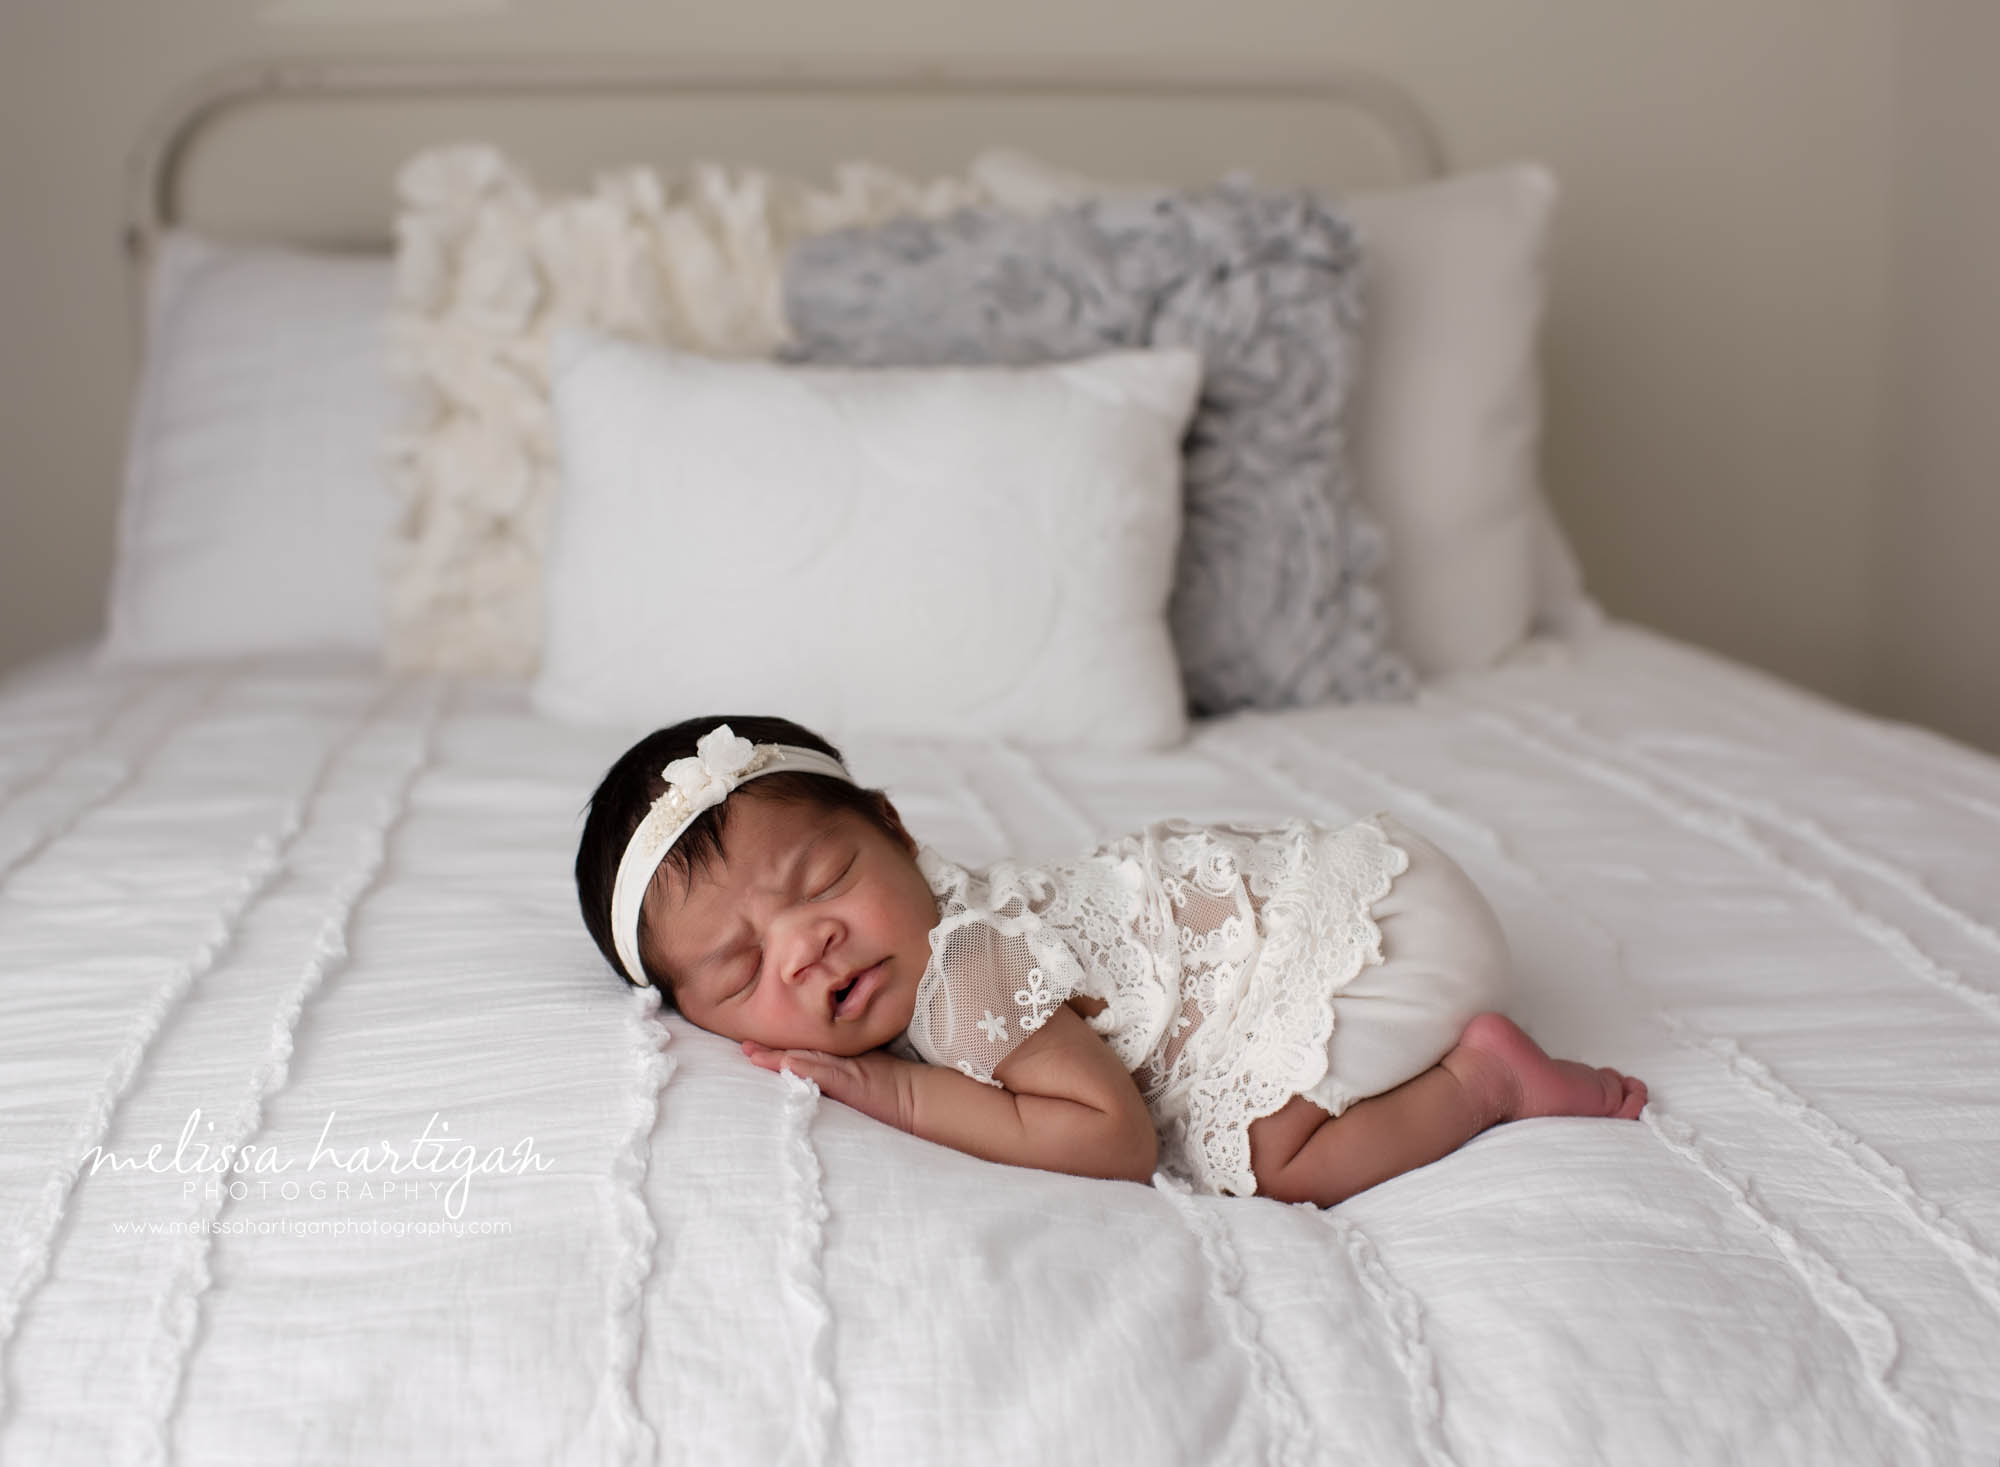 baby girl posed on bed wearing clace cream outfit and headband